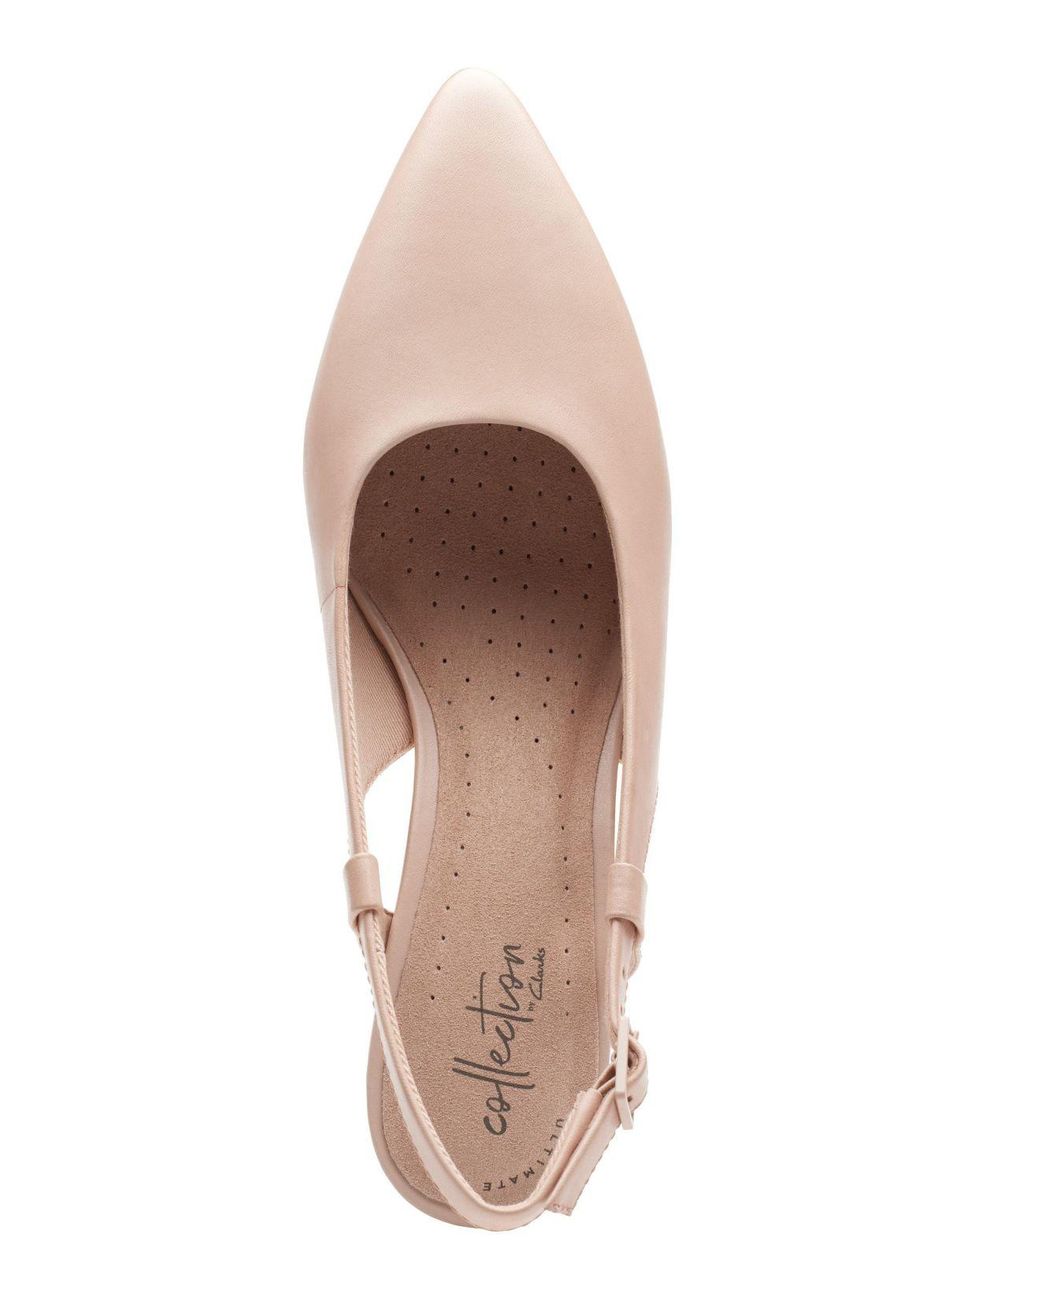 Clarks Leather Linvale Loop Womens Slingback Shoes in Blush Leather (Pink)  | Lyst